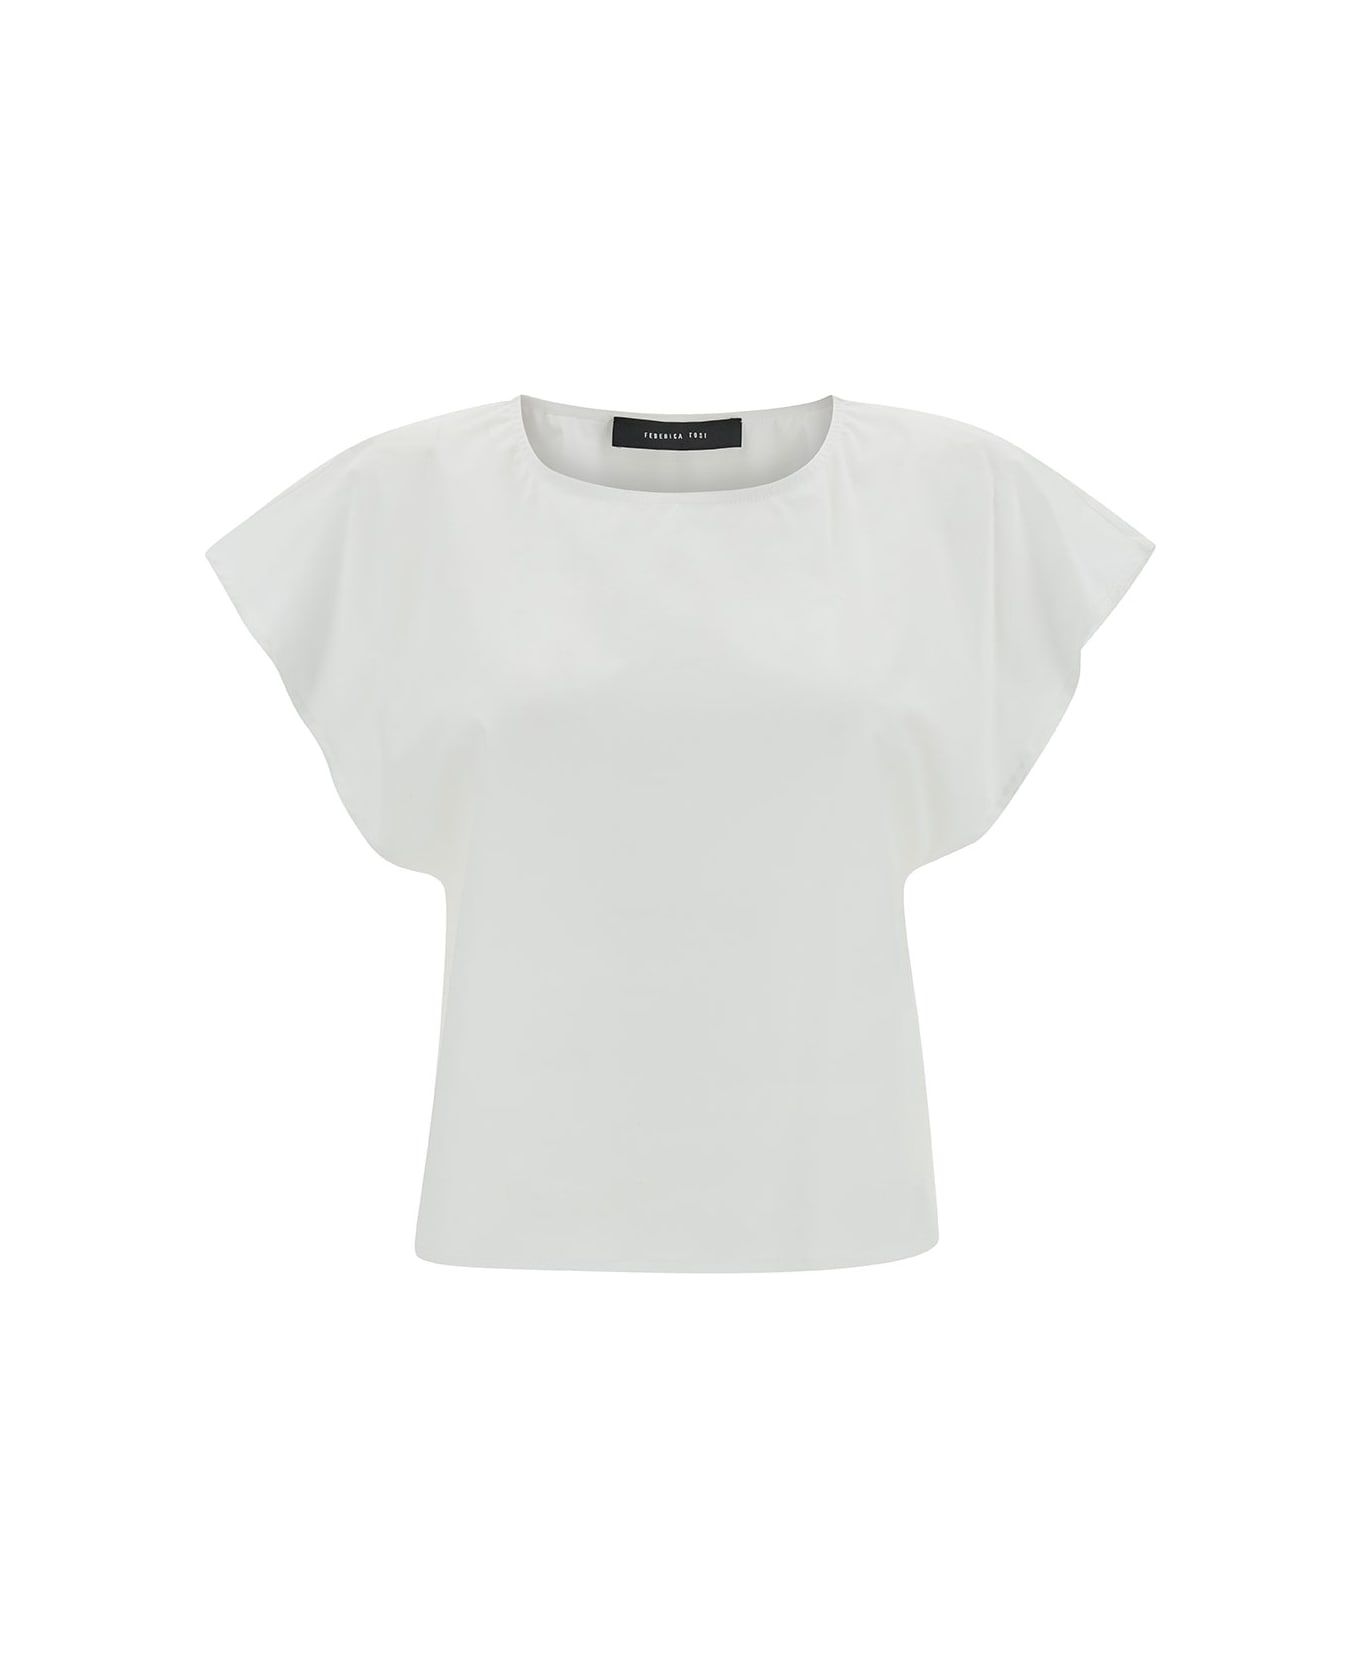 Federica Tosi White Top With Cap Sleeves In Stretch Cotton Woman - White トップス